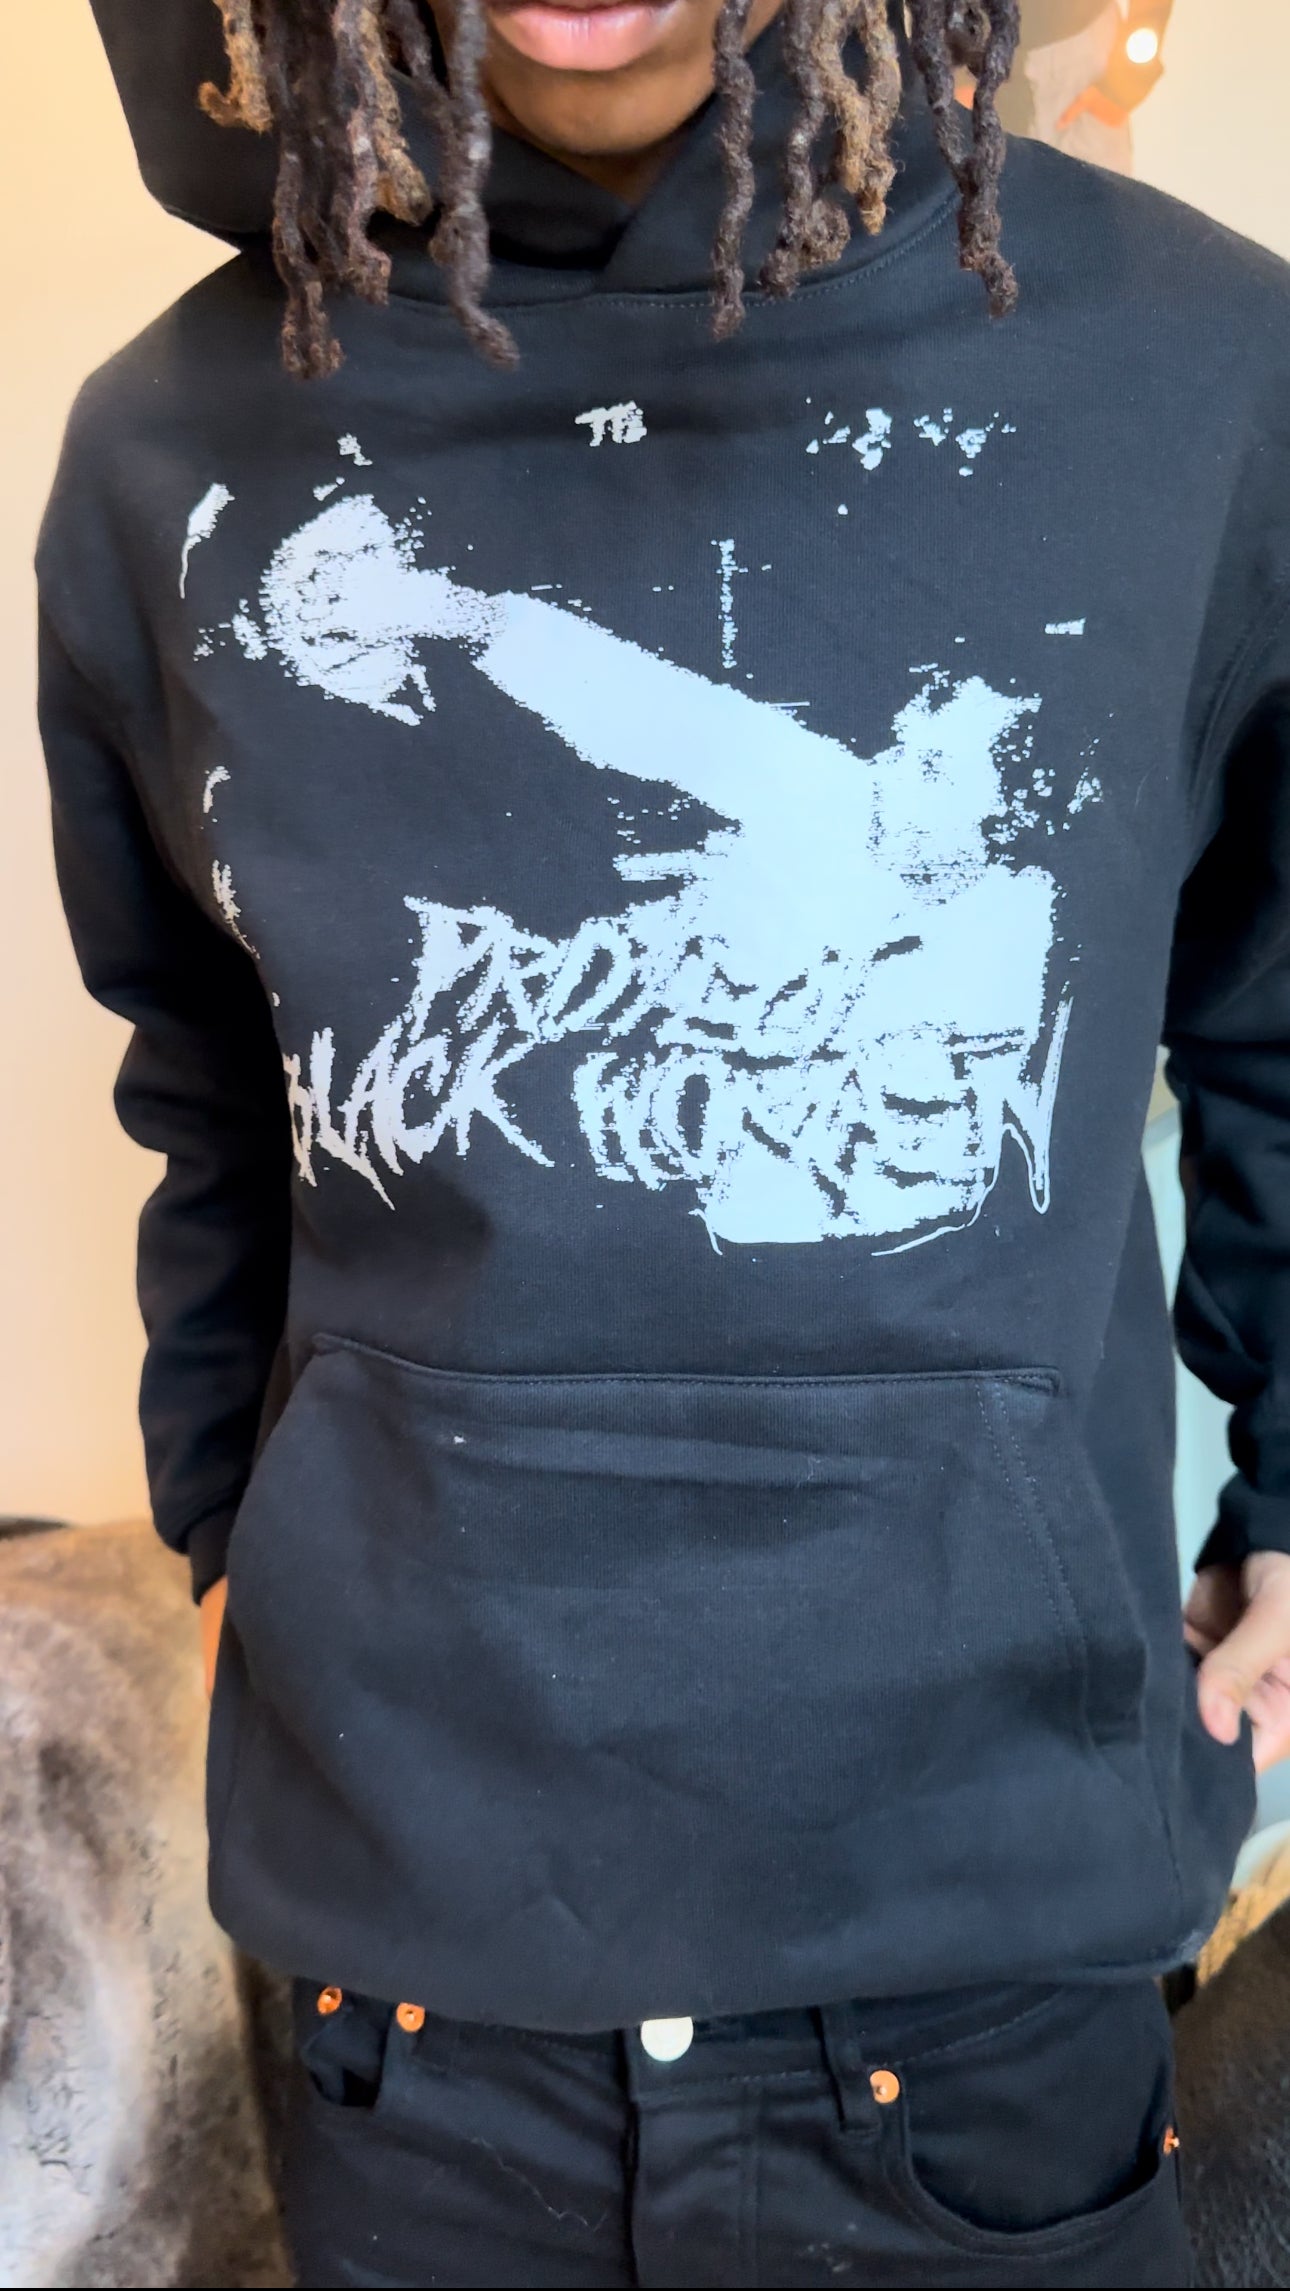 722 Clothing: “Protect Her Neck” Hoodie